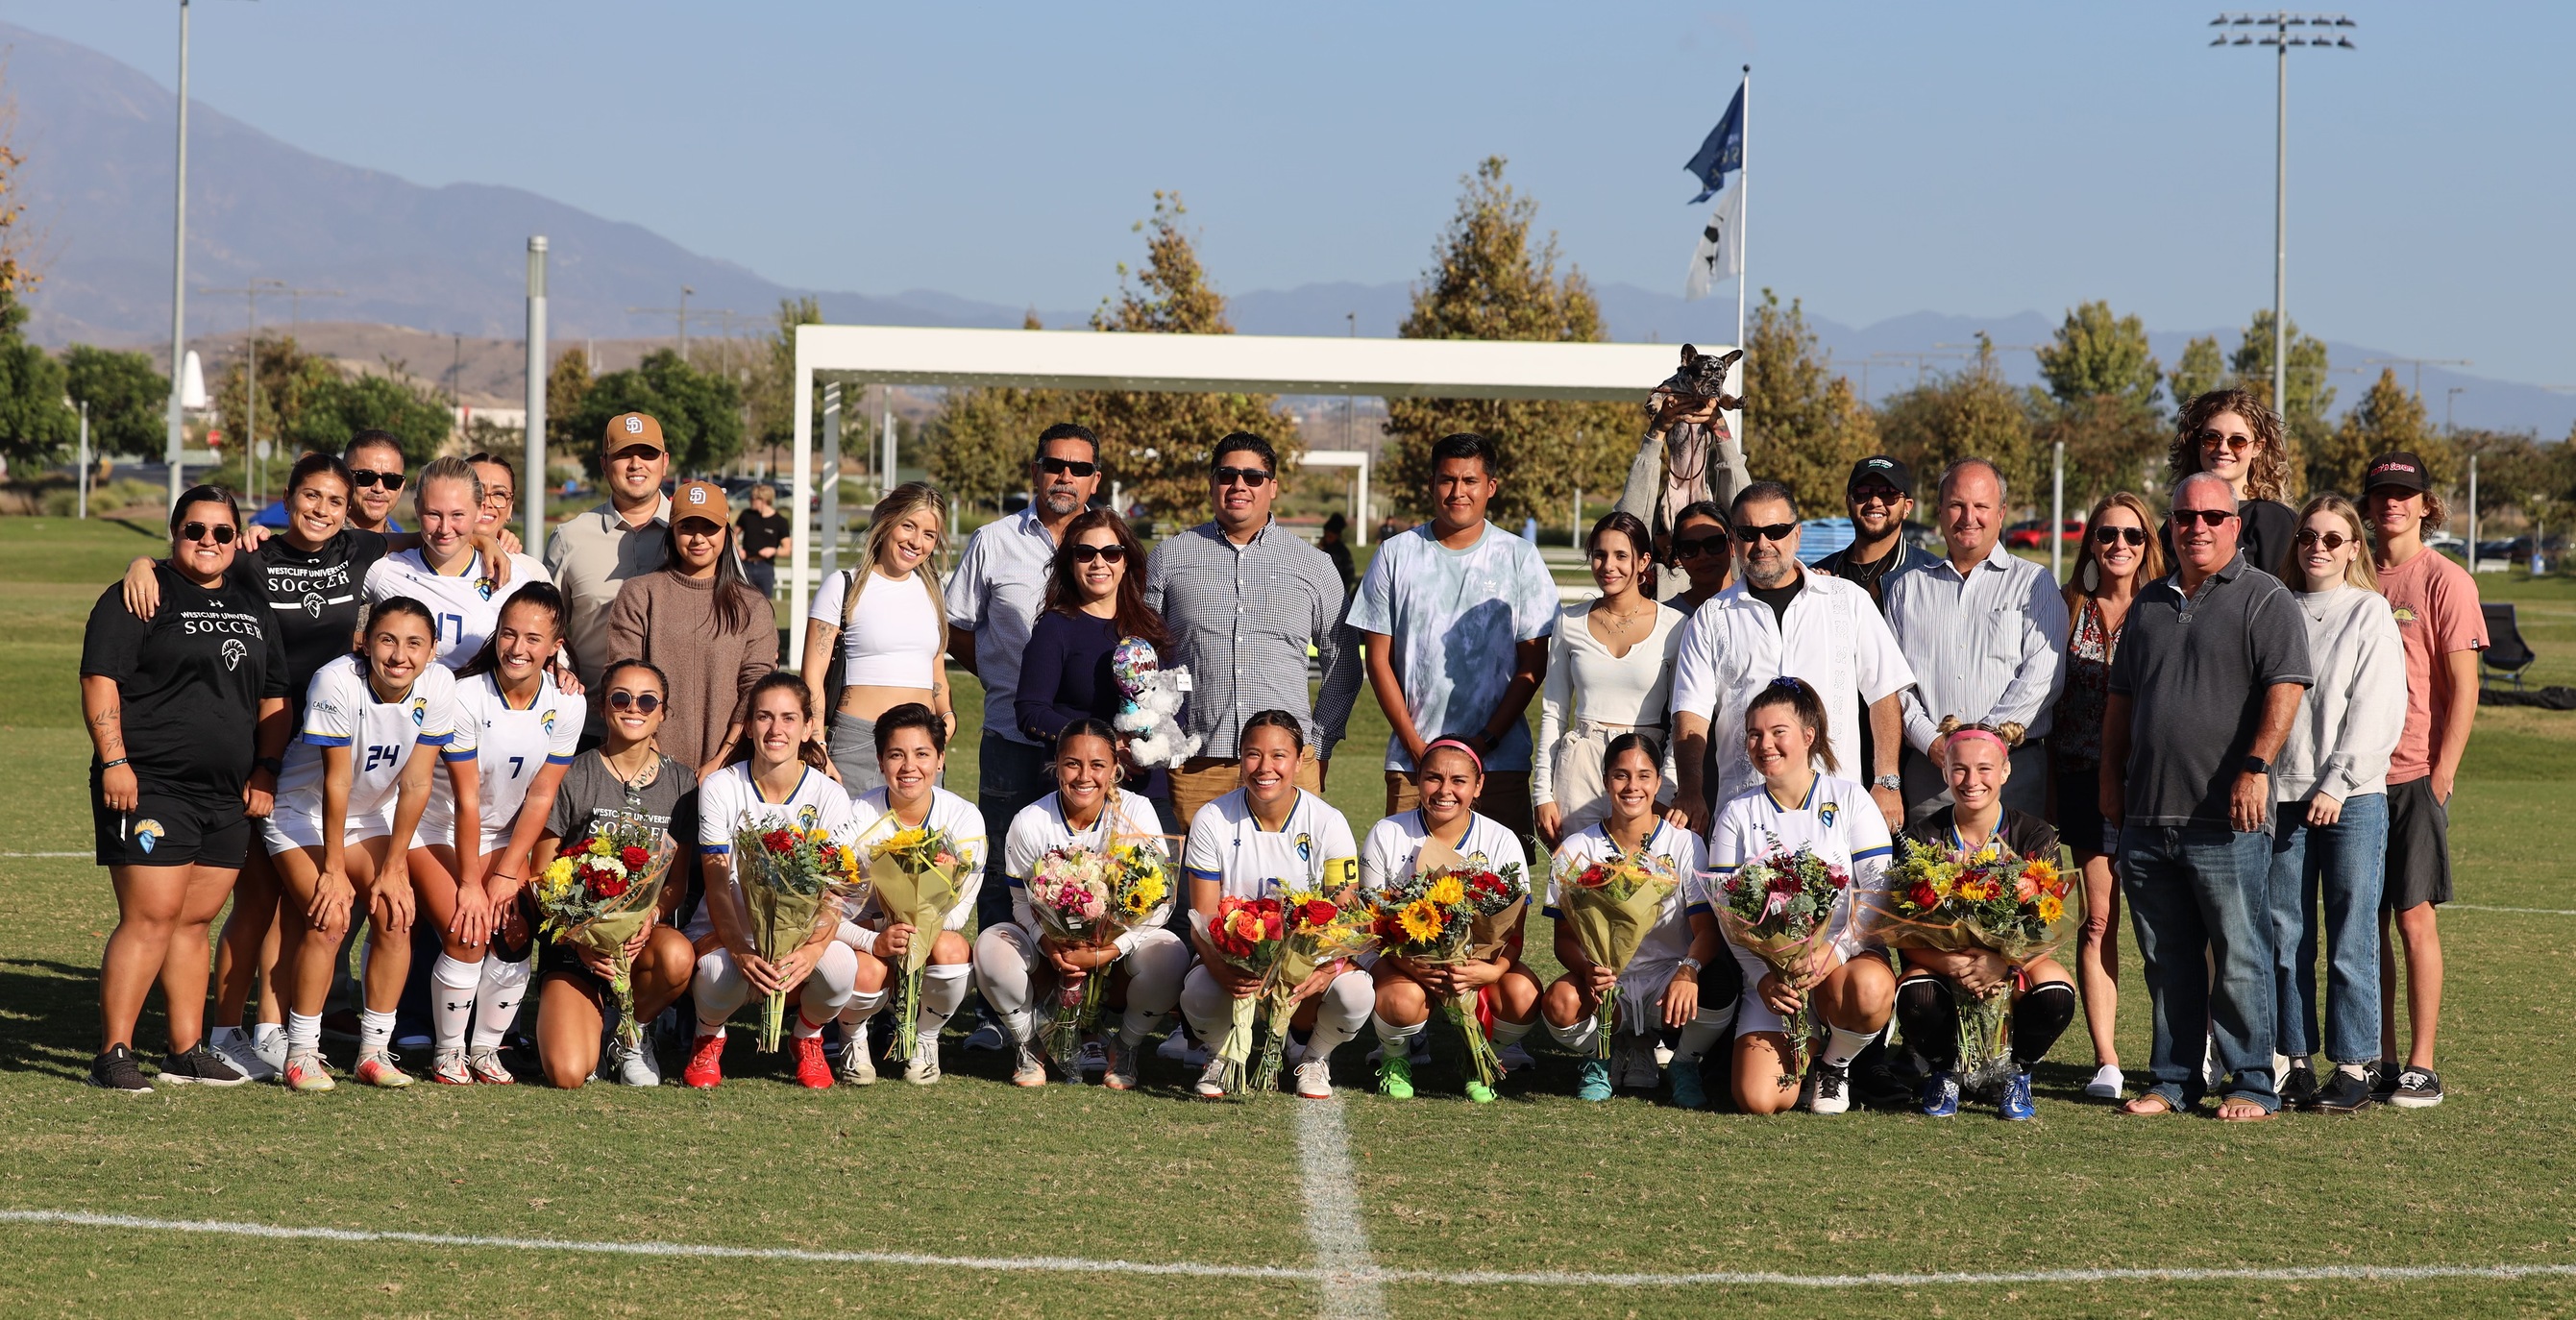 Women's Soccer finished the Cal Pac season in second place, earning a first round tournament bye. Photo by Sanjay Joshi.